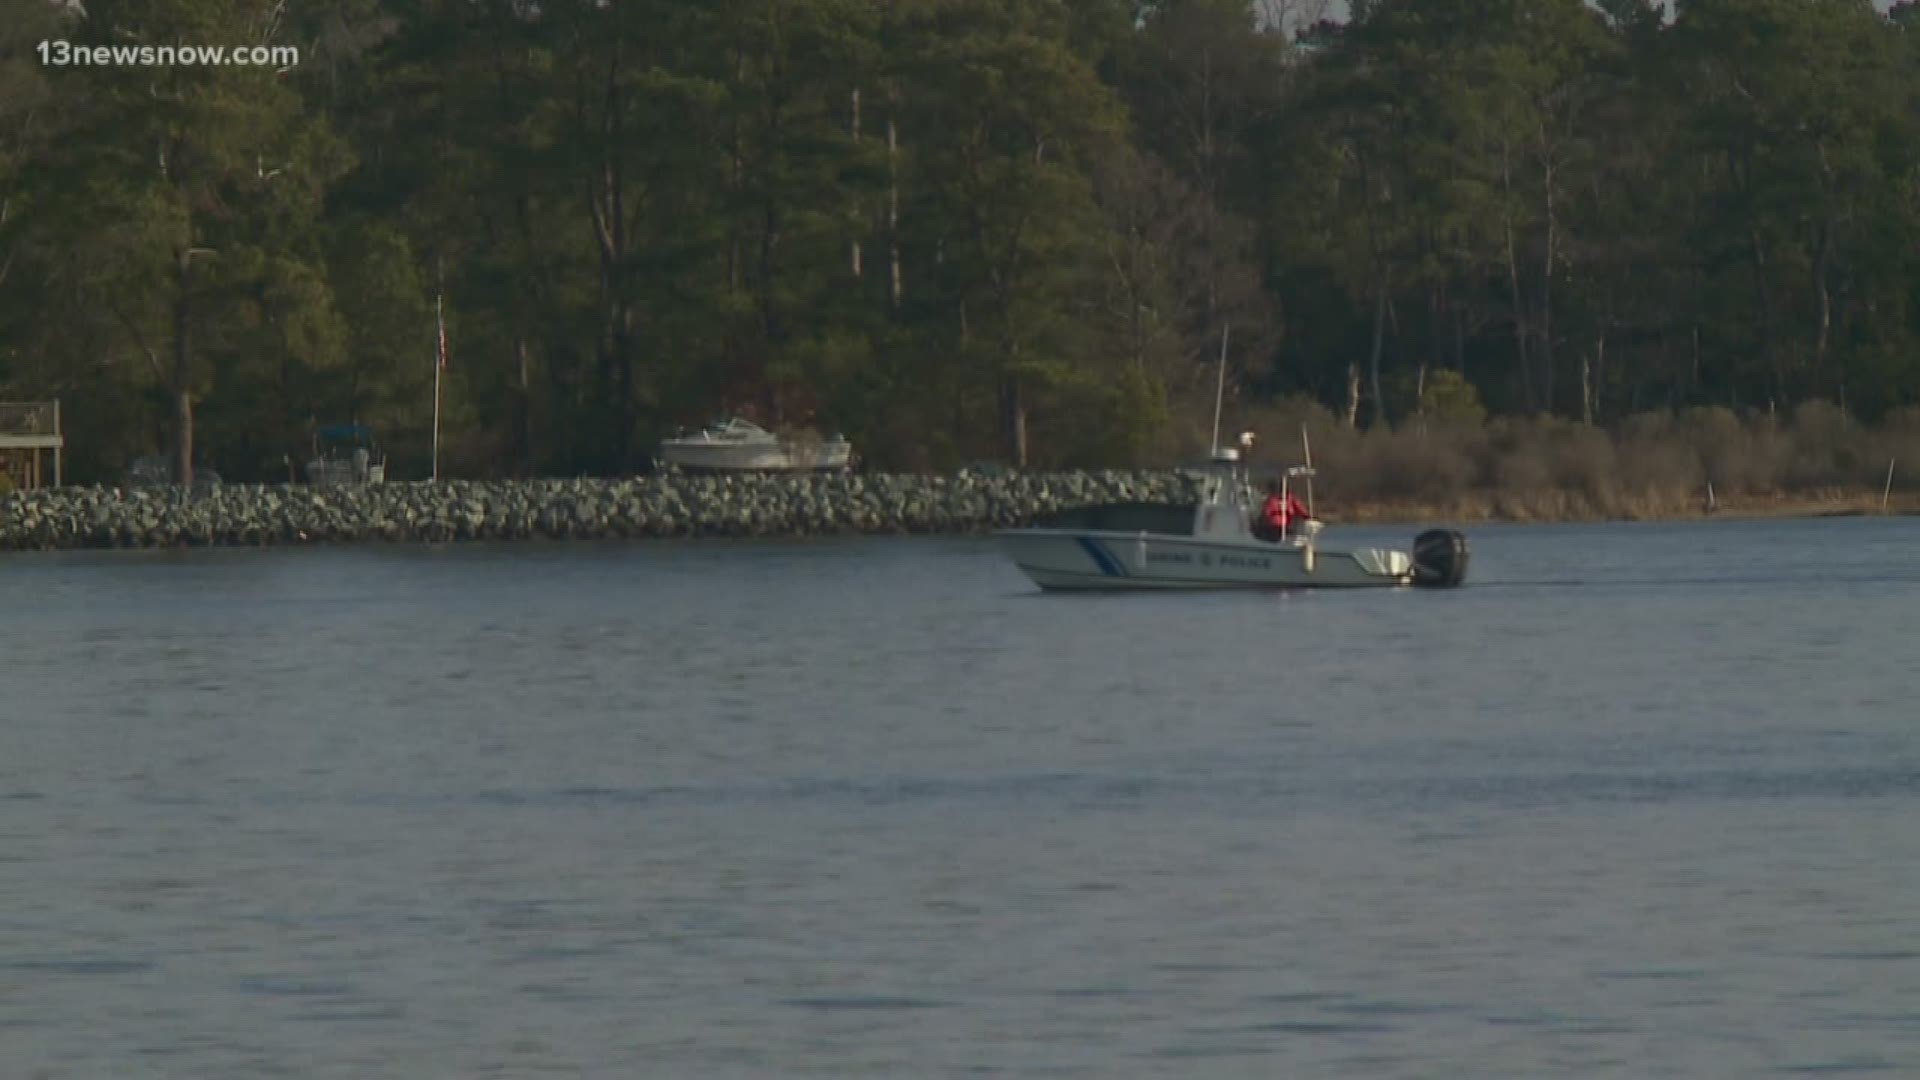 The bodies of two men, missing after their canoe flipped, have been recovered. Only one man was able to safely make it back to shore.